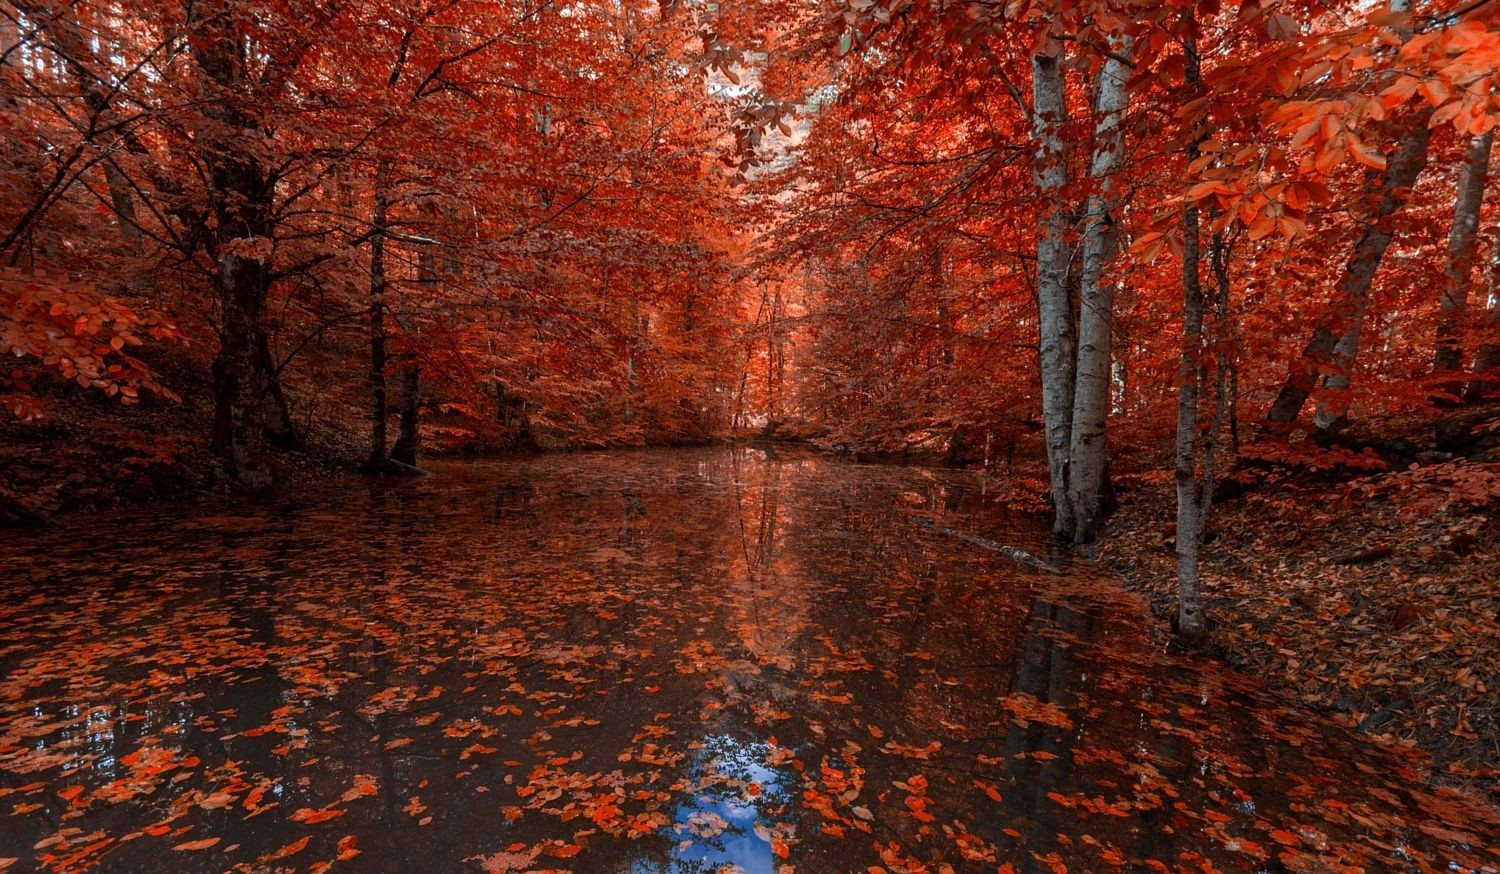 General 1500x874 nature photography landscape fall red leaves river forest trees